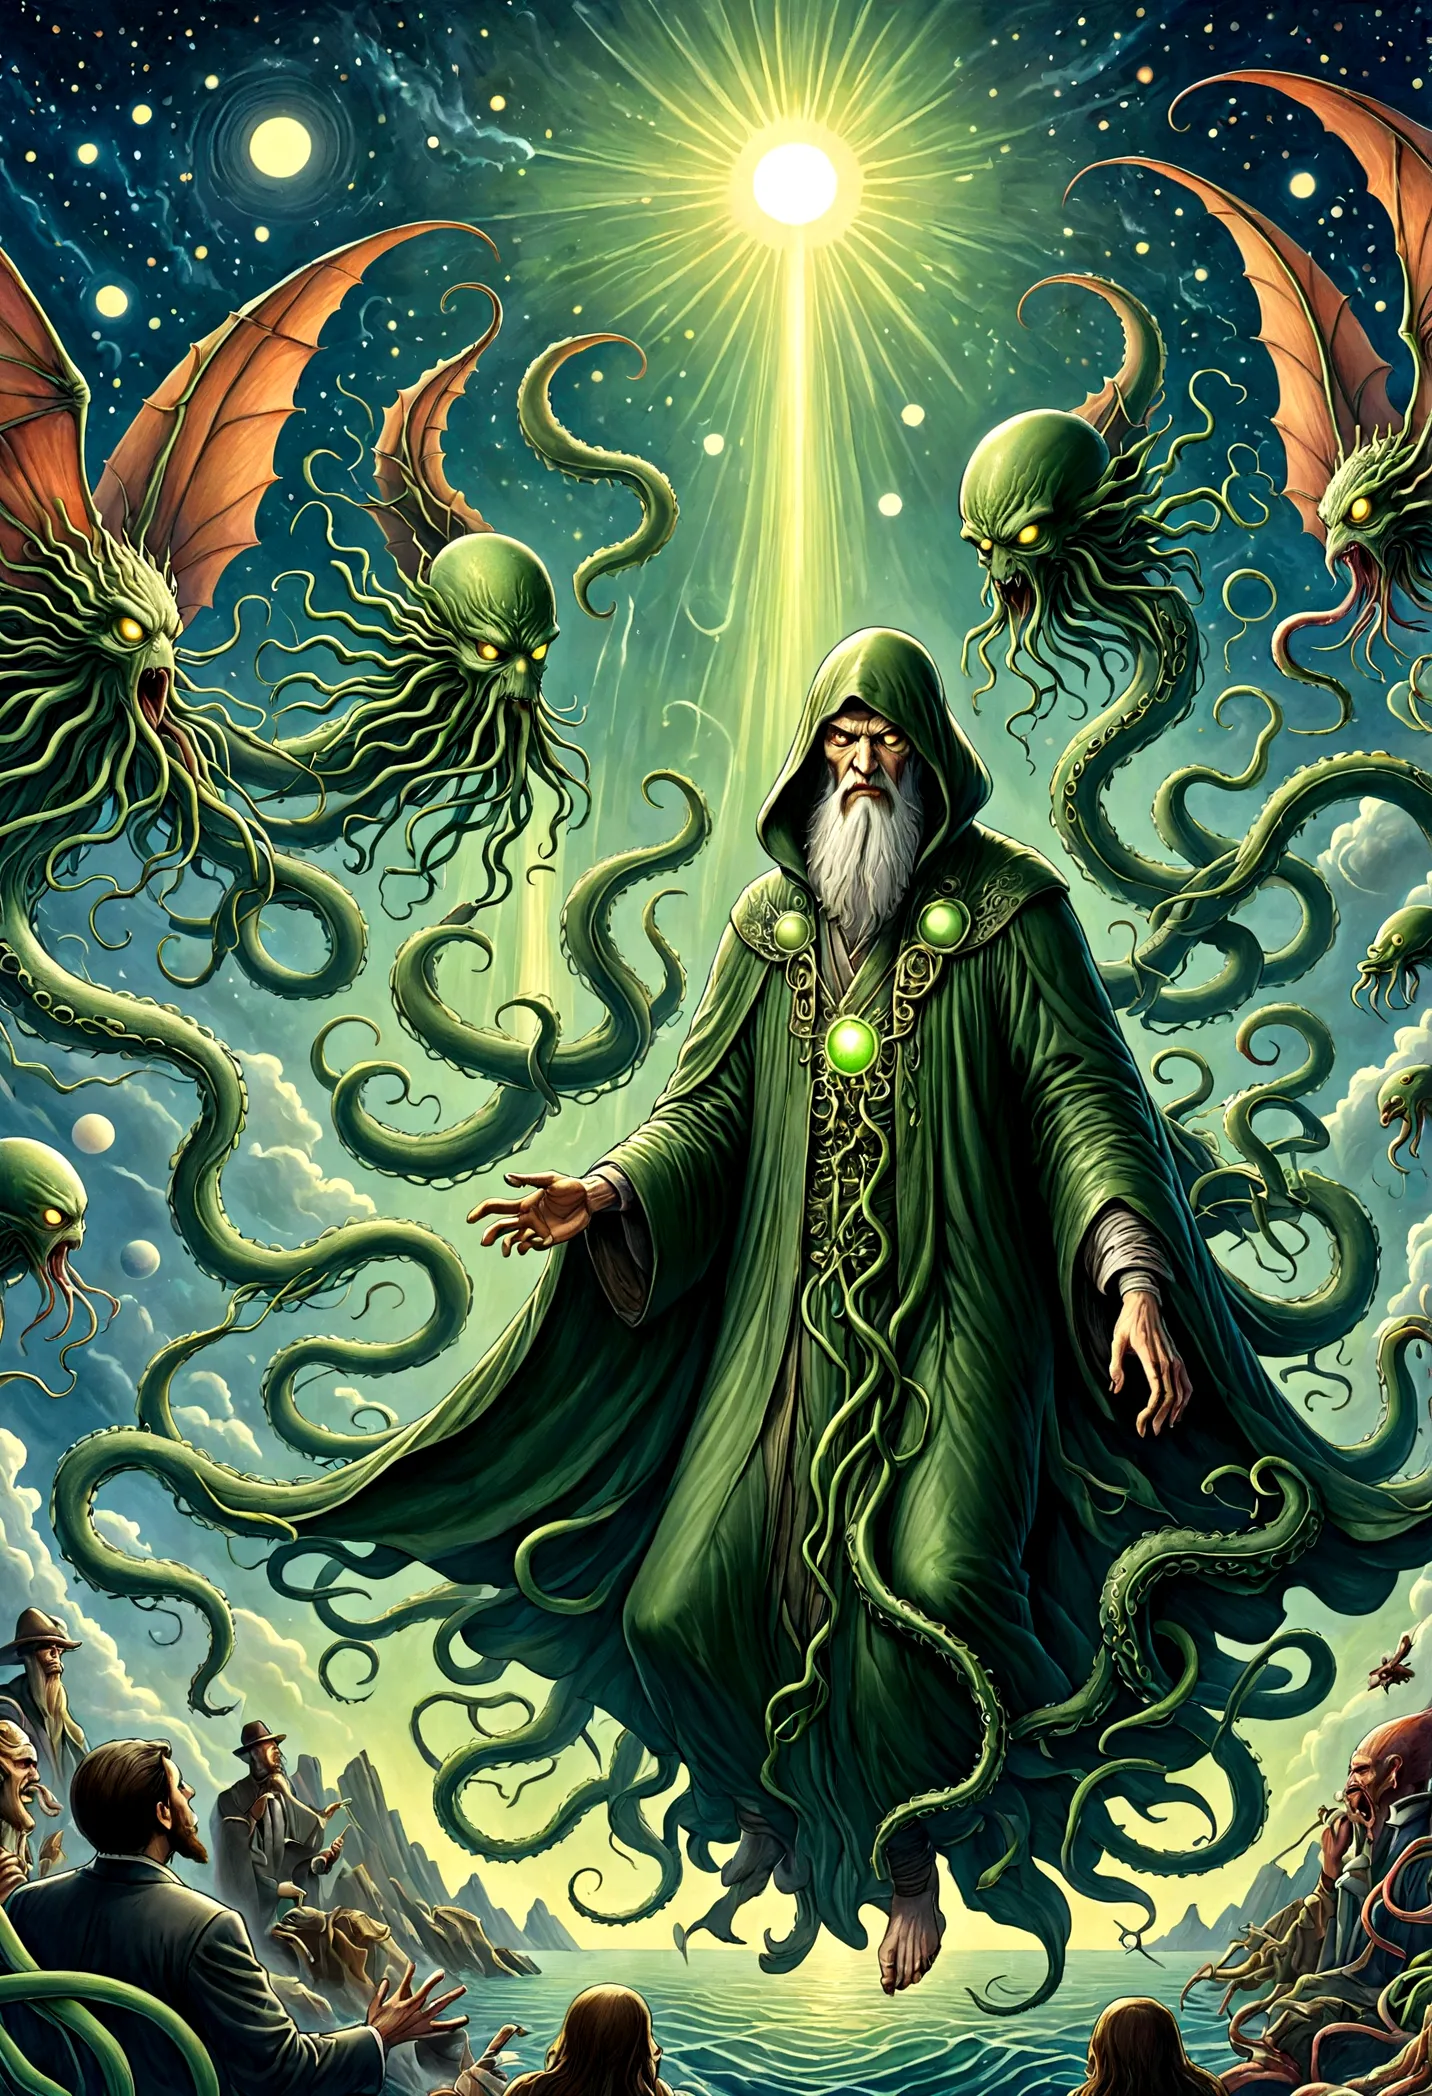 Weird creatures、Cthulhu Mythos，Extraterrestrial God，ancient，Call of Cthulhu，Space Terrorism，Long tentacles，wing，Holy and demonic...